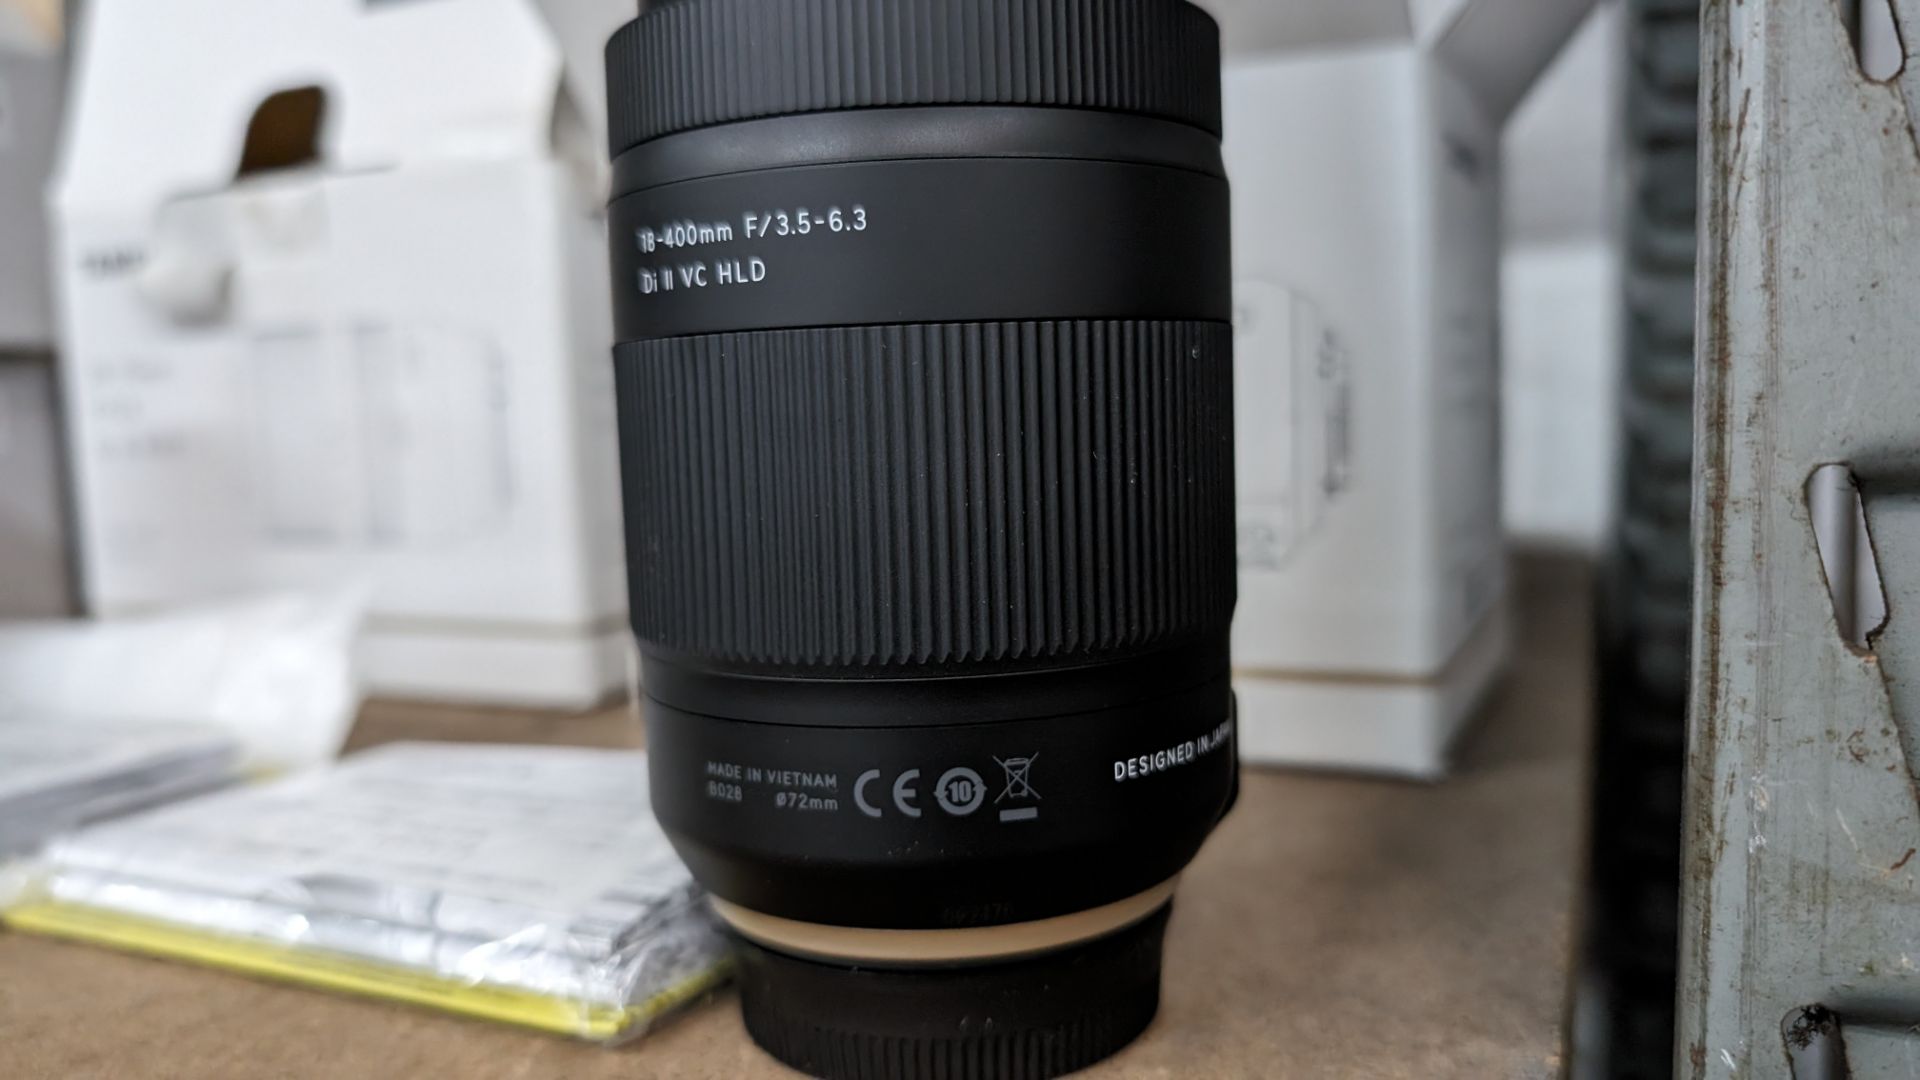 Tamron 18-400mm lens, f/3.5-6.3, Di II VC HLD. Filter size 72mm. For Nikon - Image 7 of 7